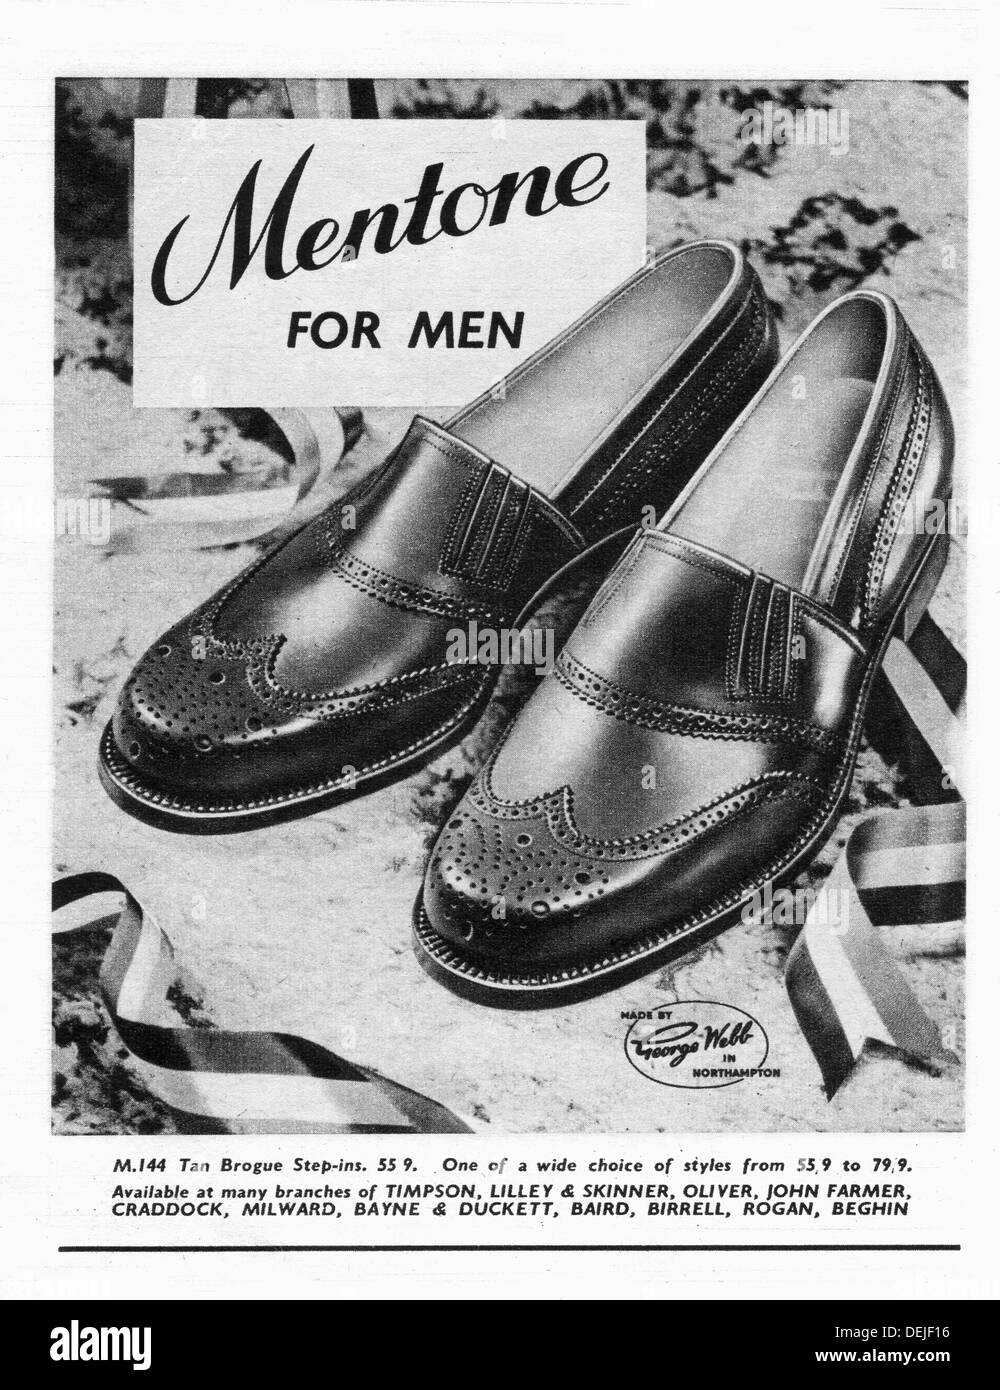 advert for mens shoes  in 1953 Stock Photo